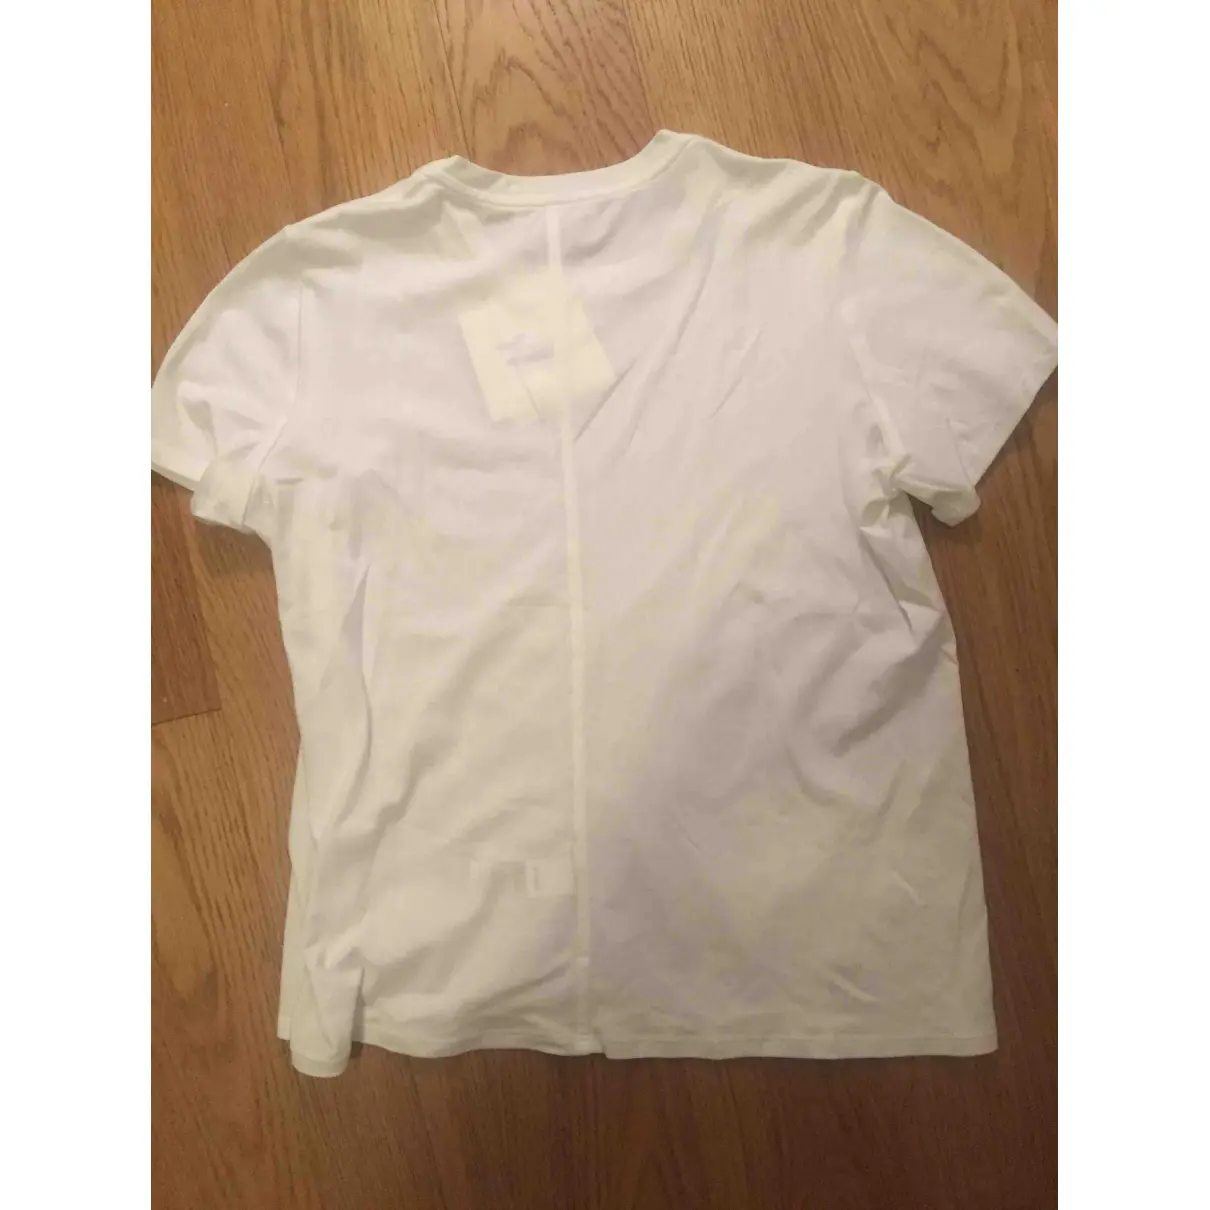 Buy The Row White Cotton Top online